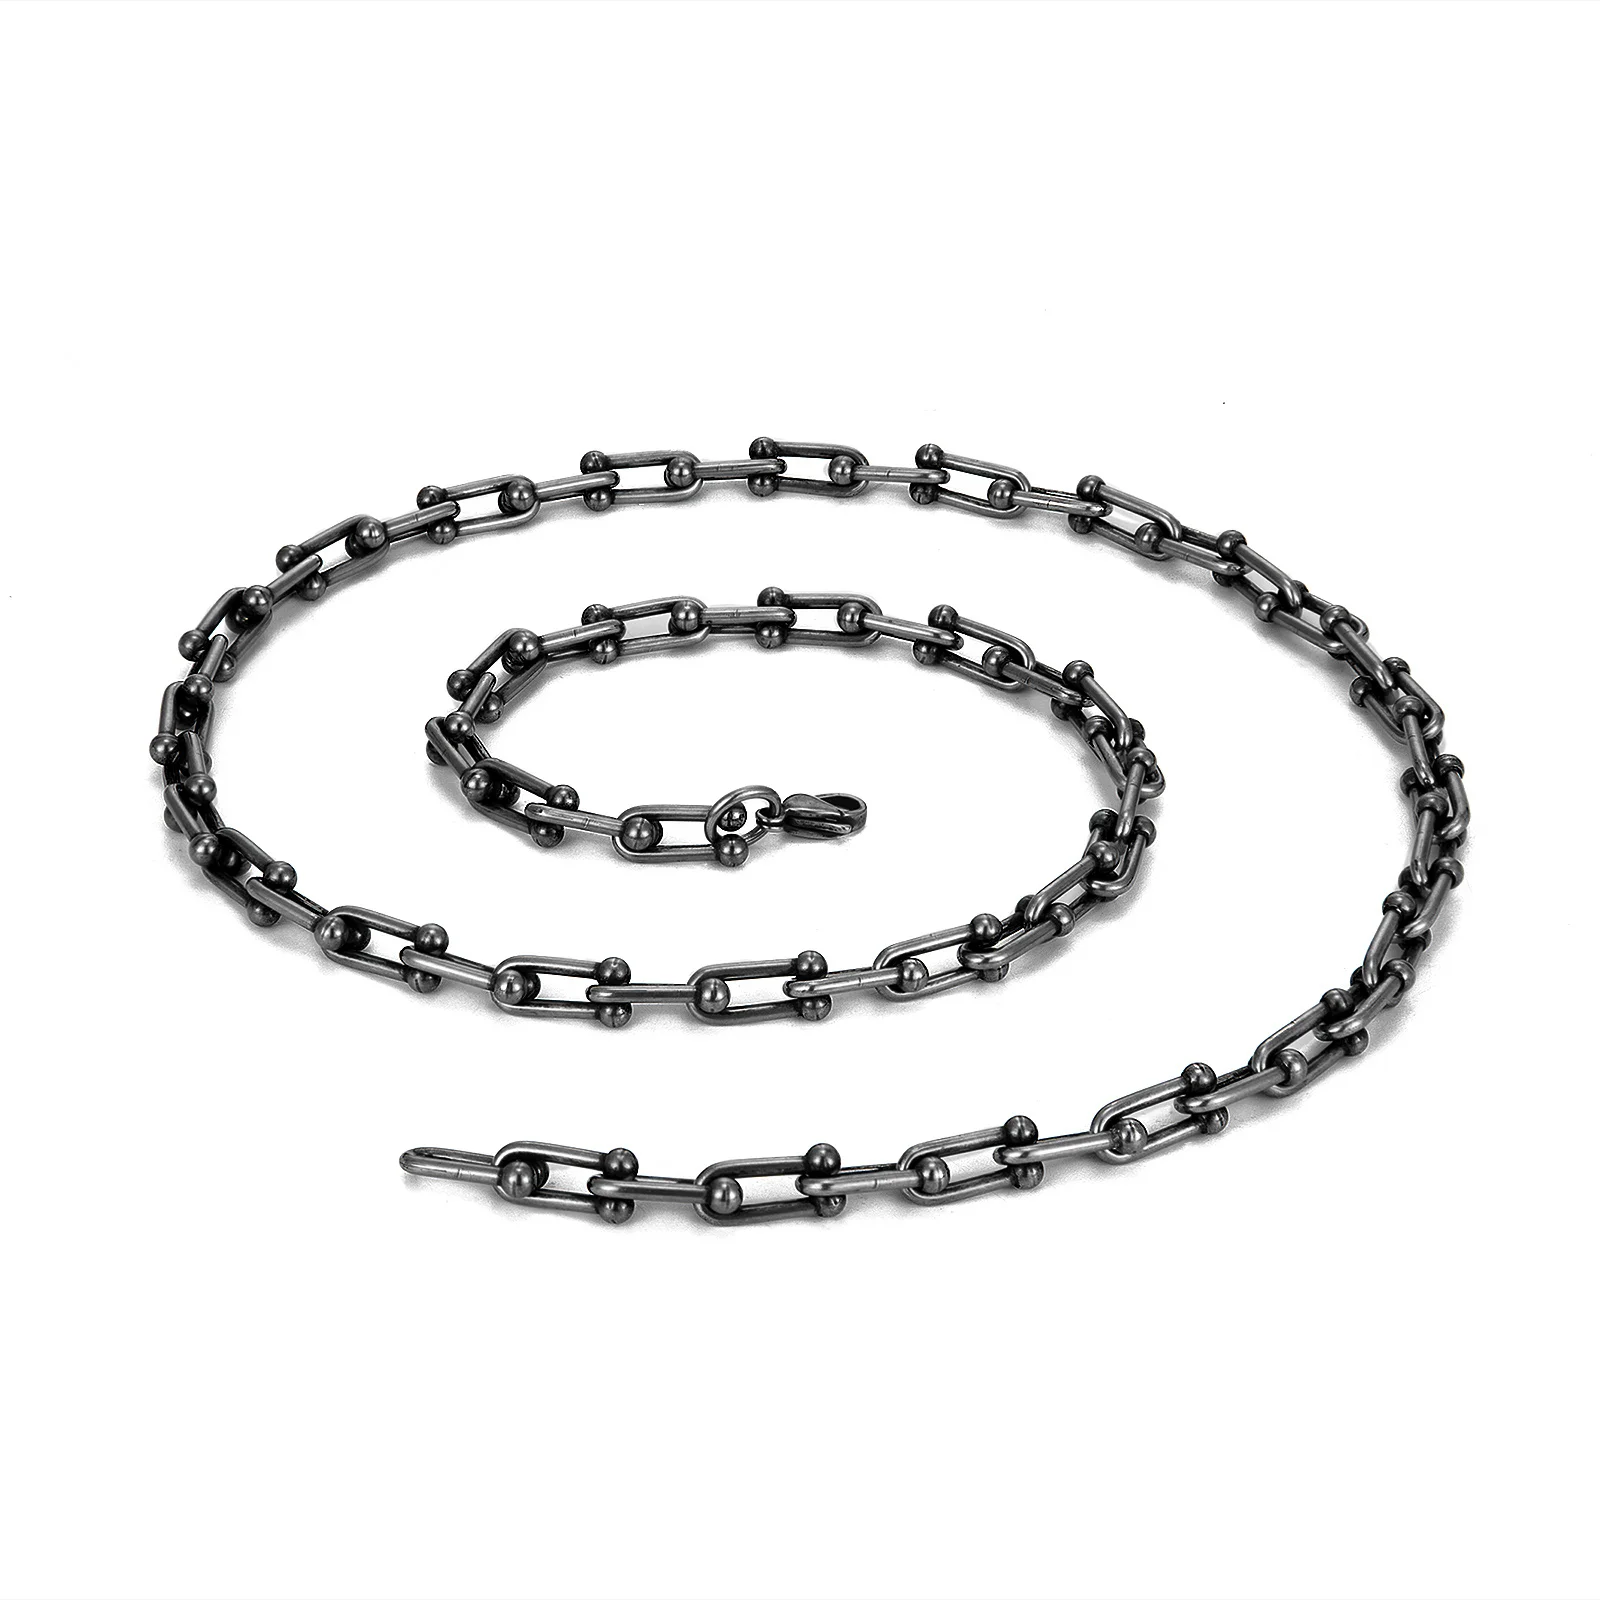 6.7mm Wide Necklace Stainless Steel Cuban Chain Vintage Black Punk Long Men Hip Hop Brushed Matte Silver Male Jewelry Accessorie images - 6